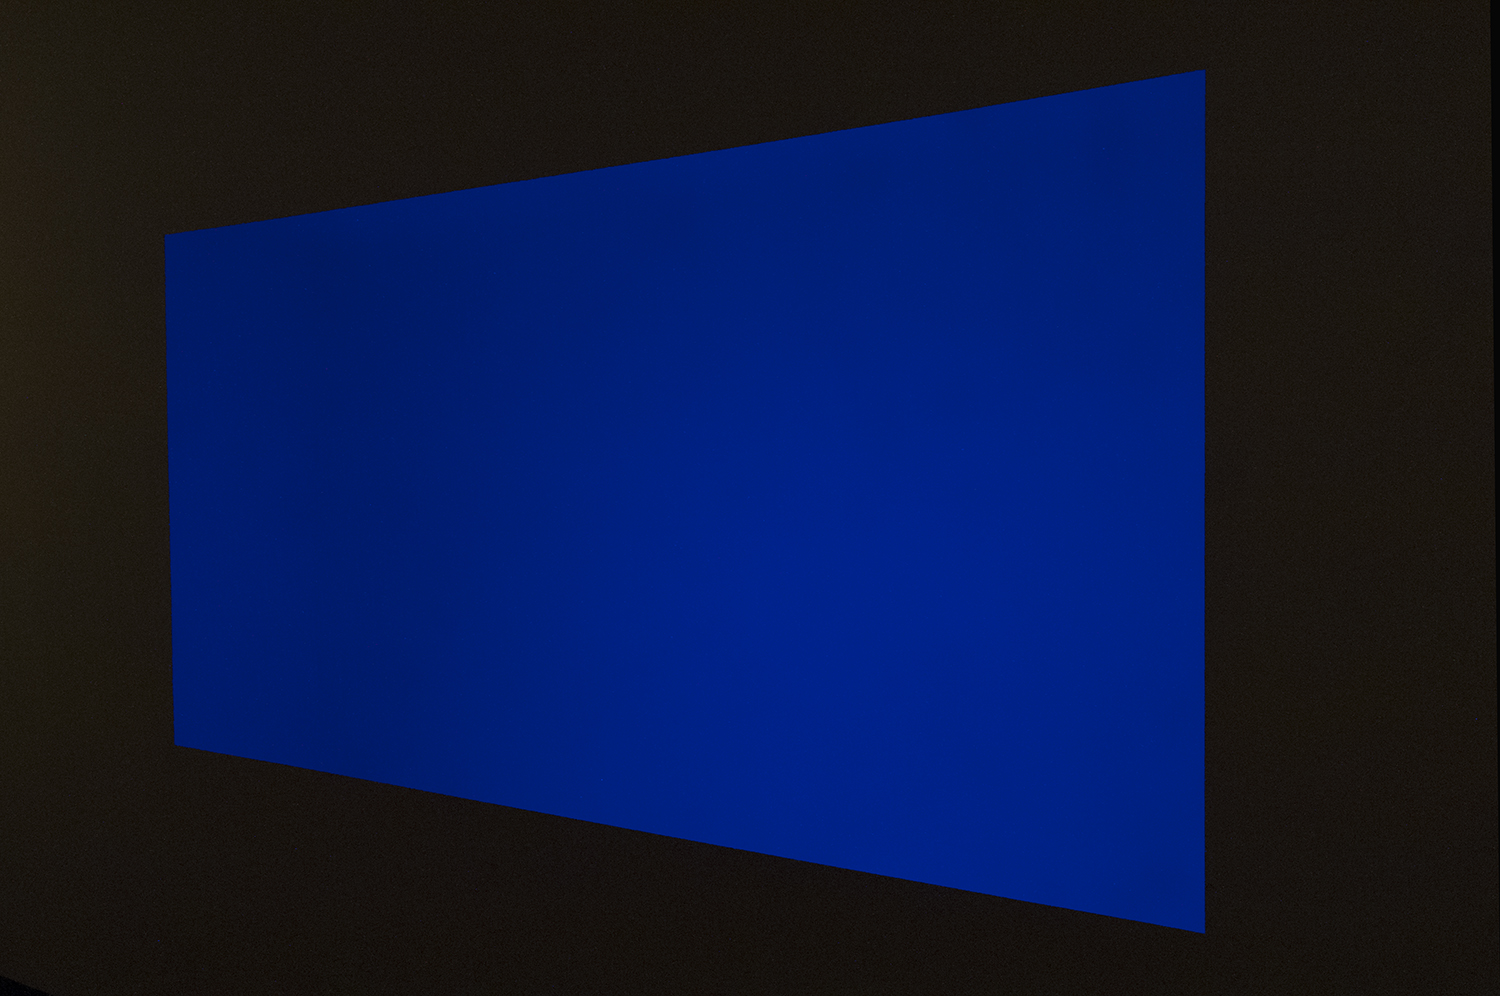 James Turrell's Gap from the series “Tiny Town,” 2001